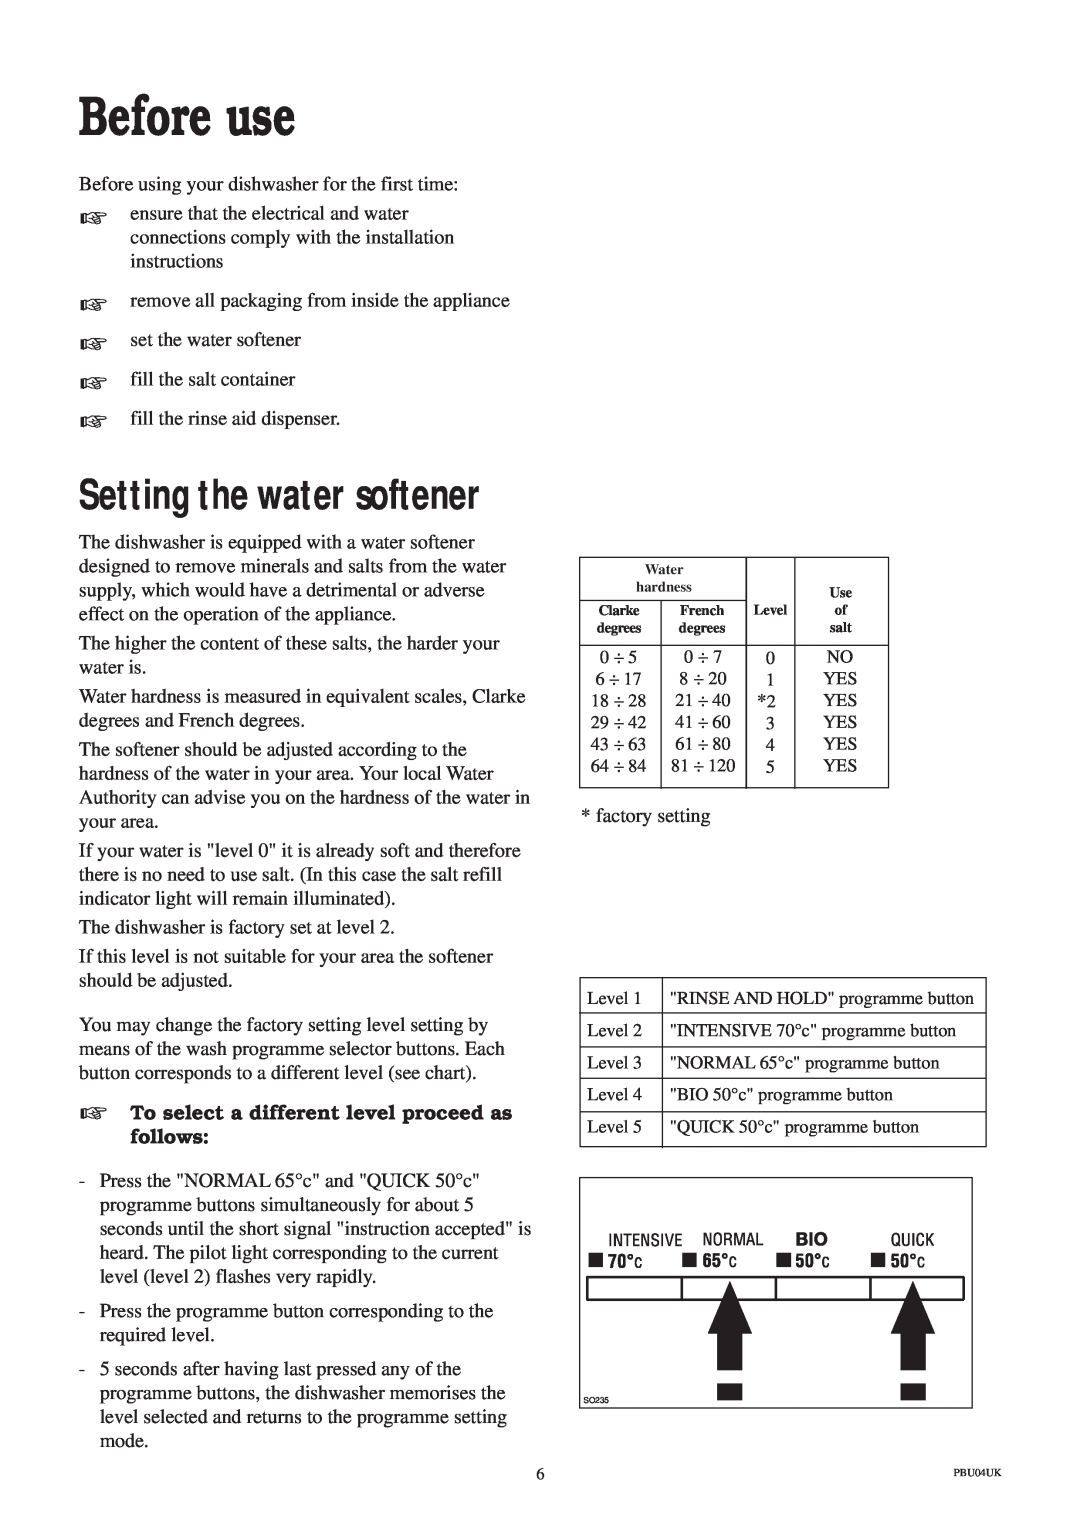 Zanussi ZT 685 manual Before use, Setting the water softener, To select a different level proceed as follows 